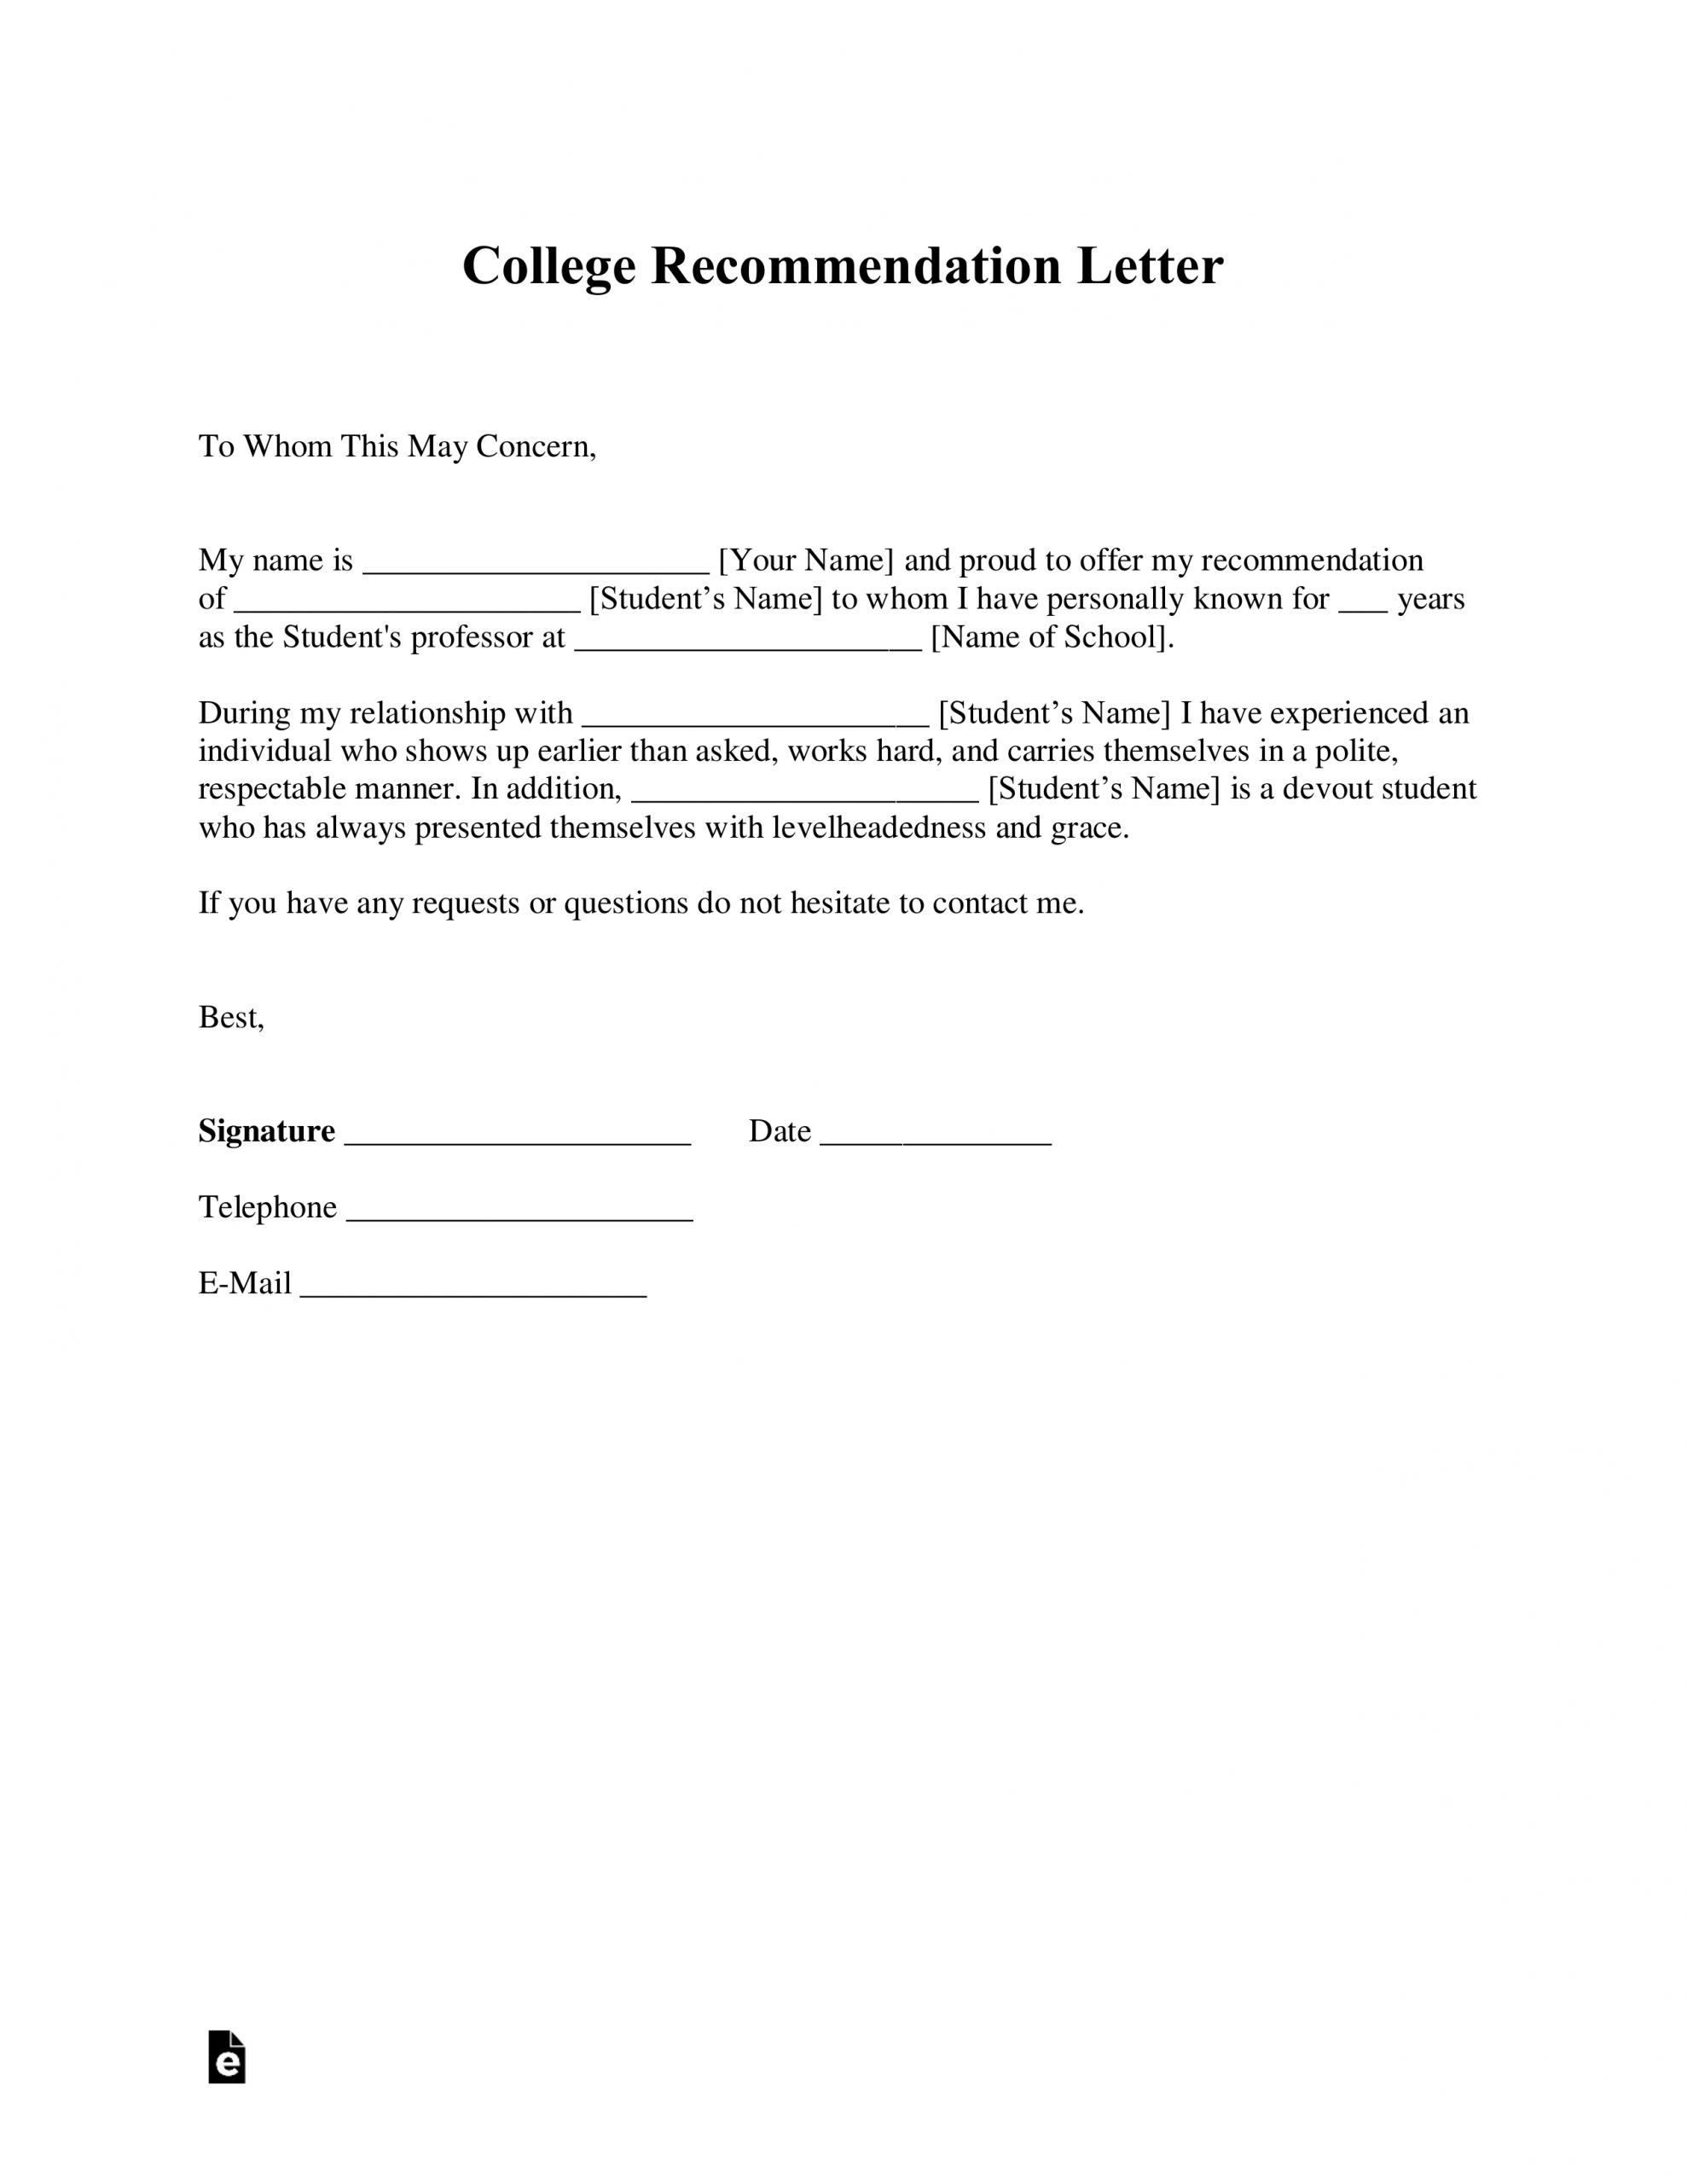 Free College Recommendation Letter Template With Samples in dimensions 2550 X 3301